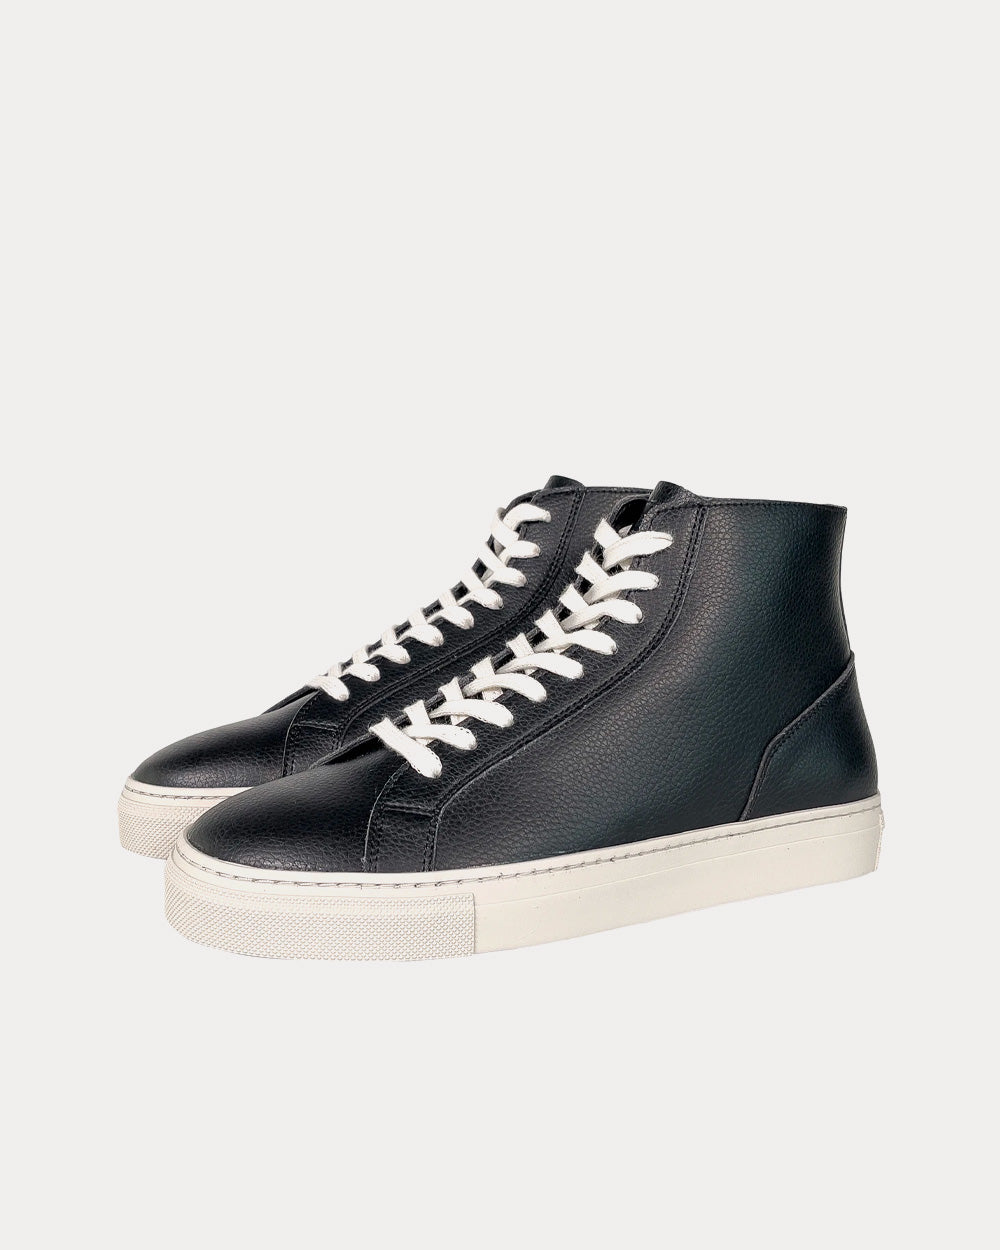 Humans Are Vain - Visby V2 Sustainable Vegan Leather Black High Top Sneakers